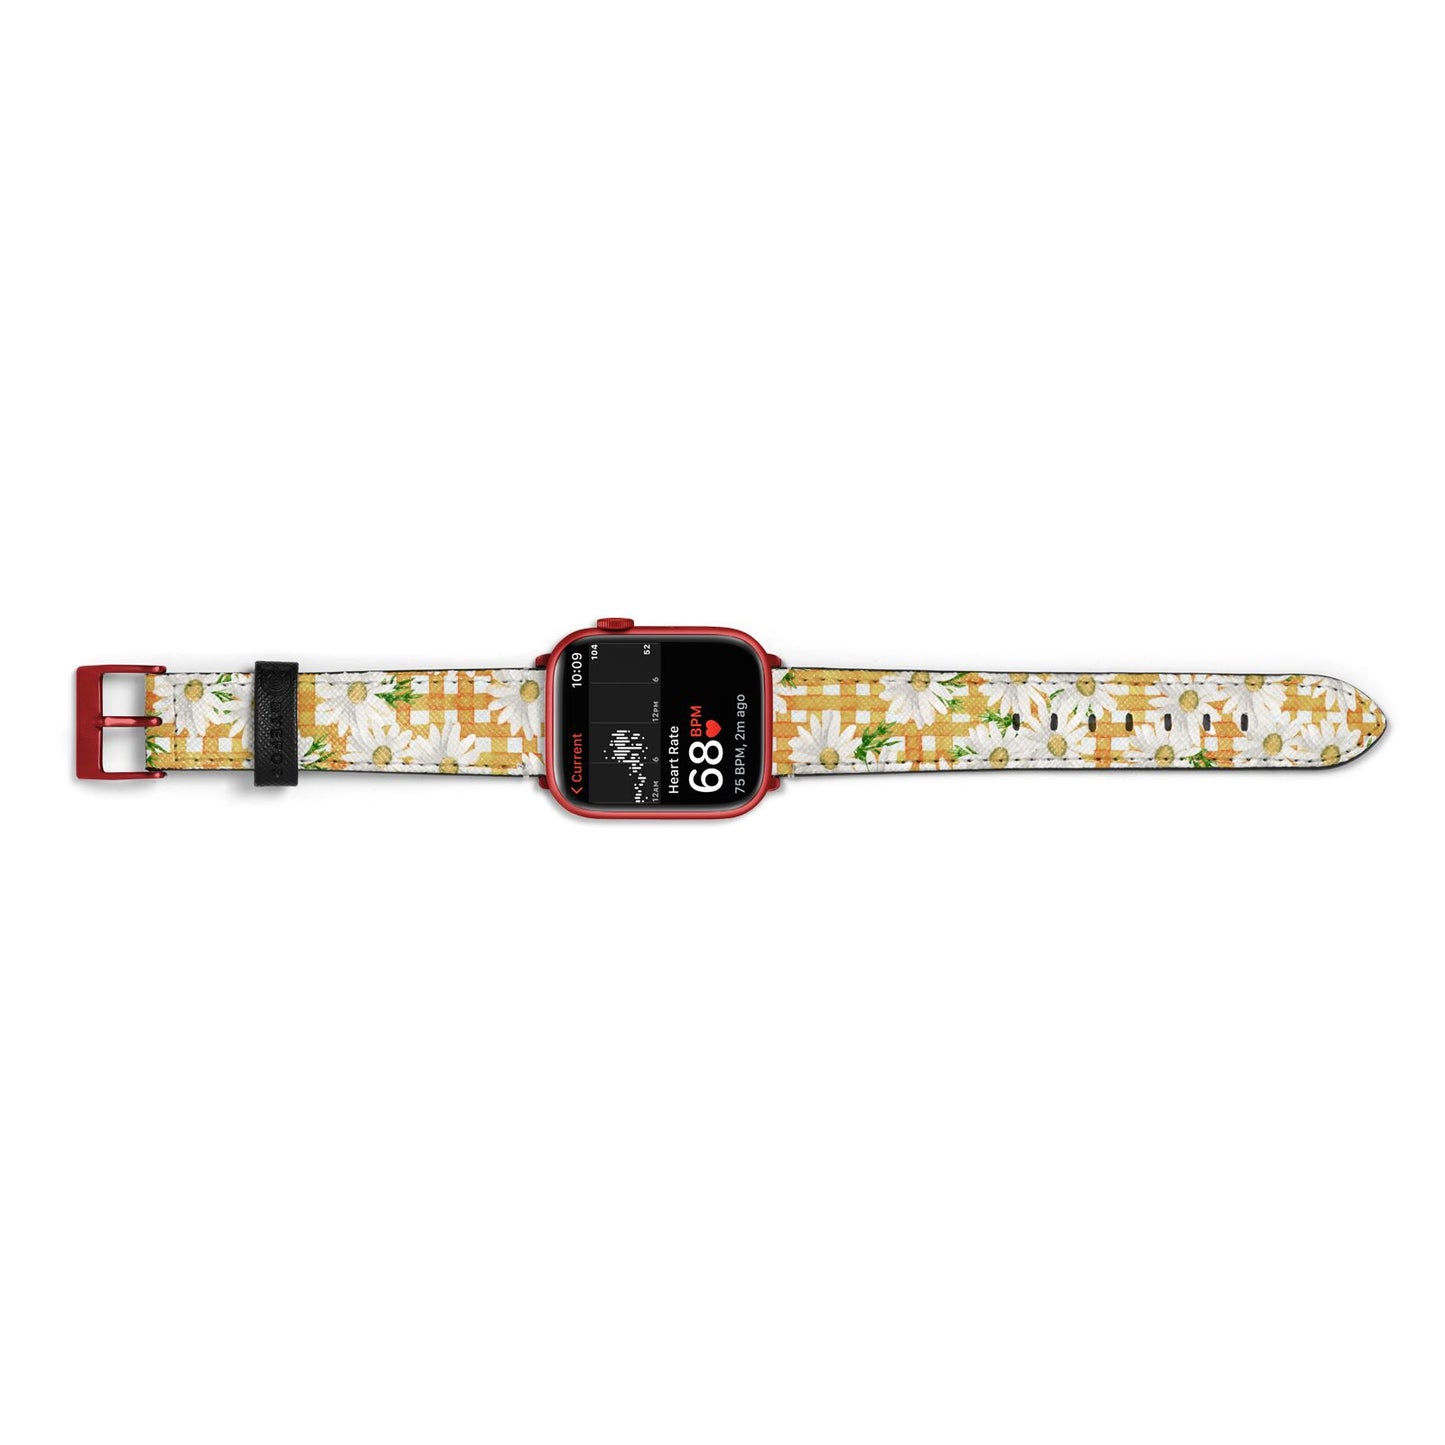 Checkered Daisy Apple Watch Strap Size 38mm Landscape Image Red Hardware